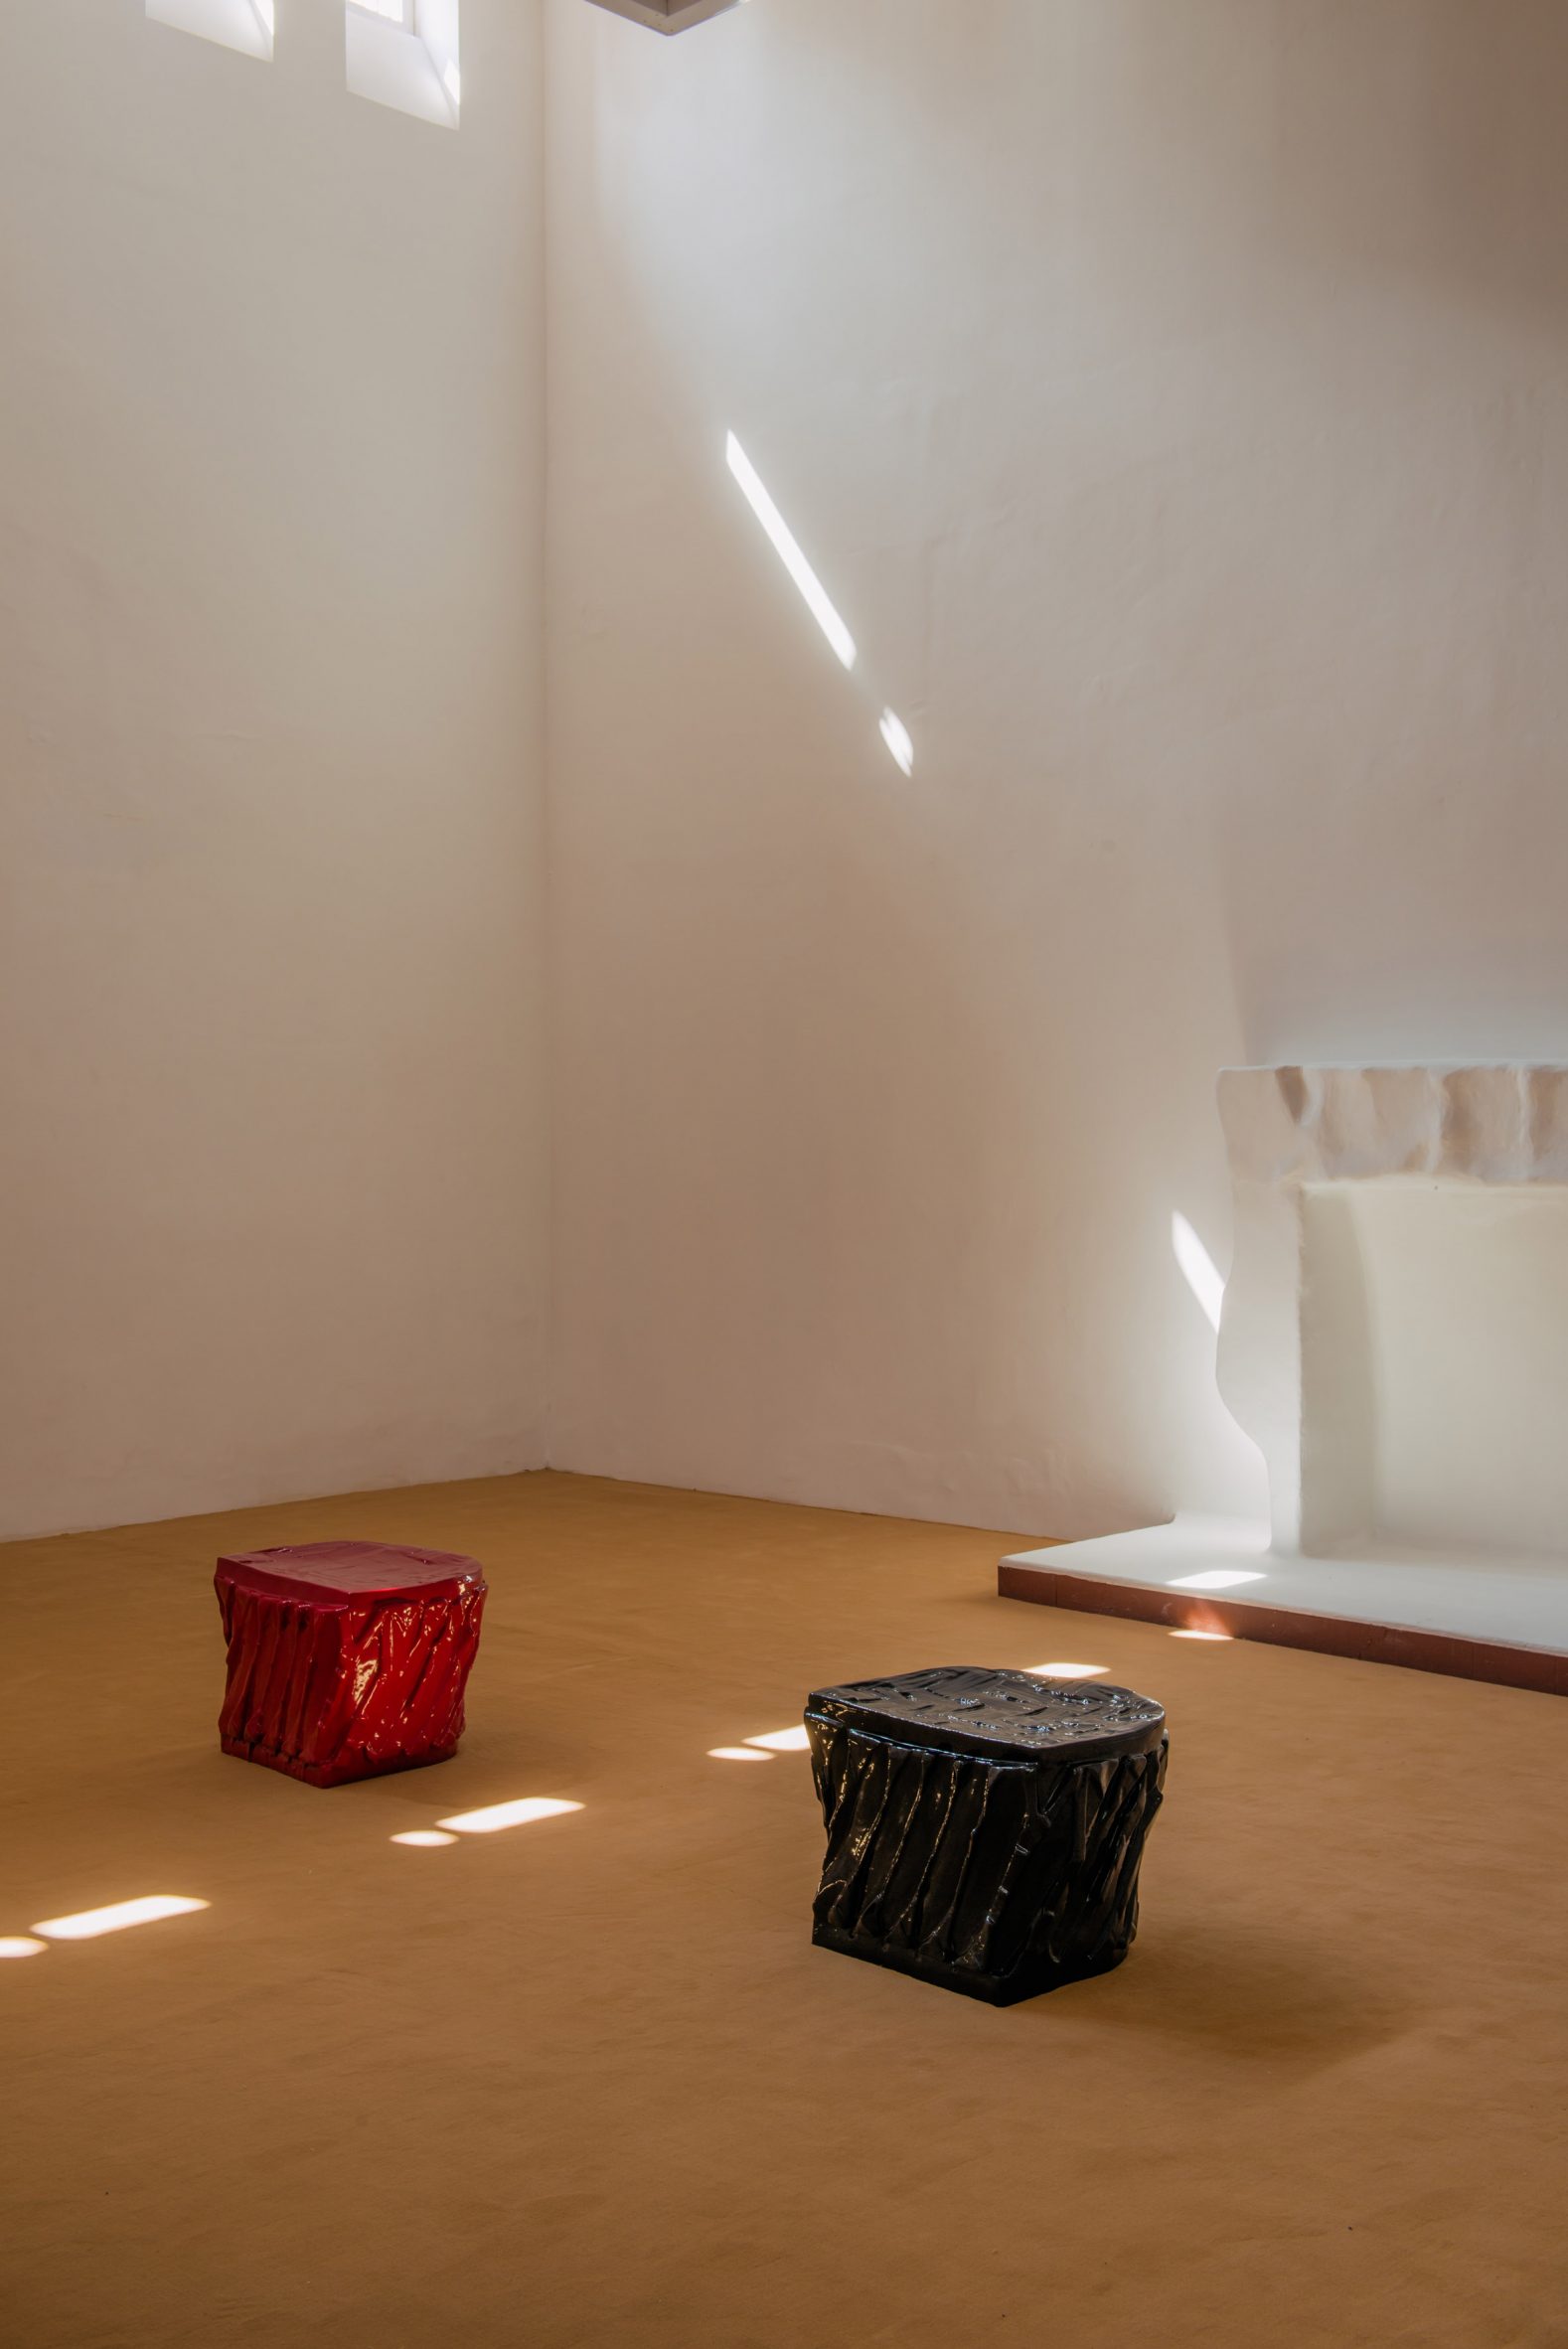 MASA gallery with Torres' stools and light from windows